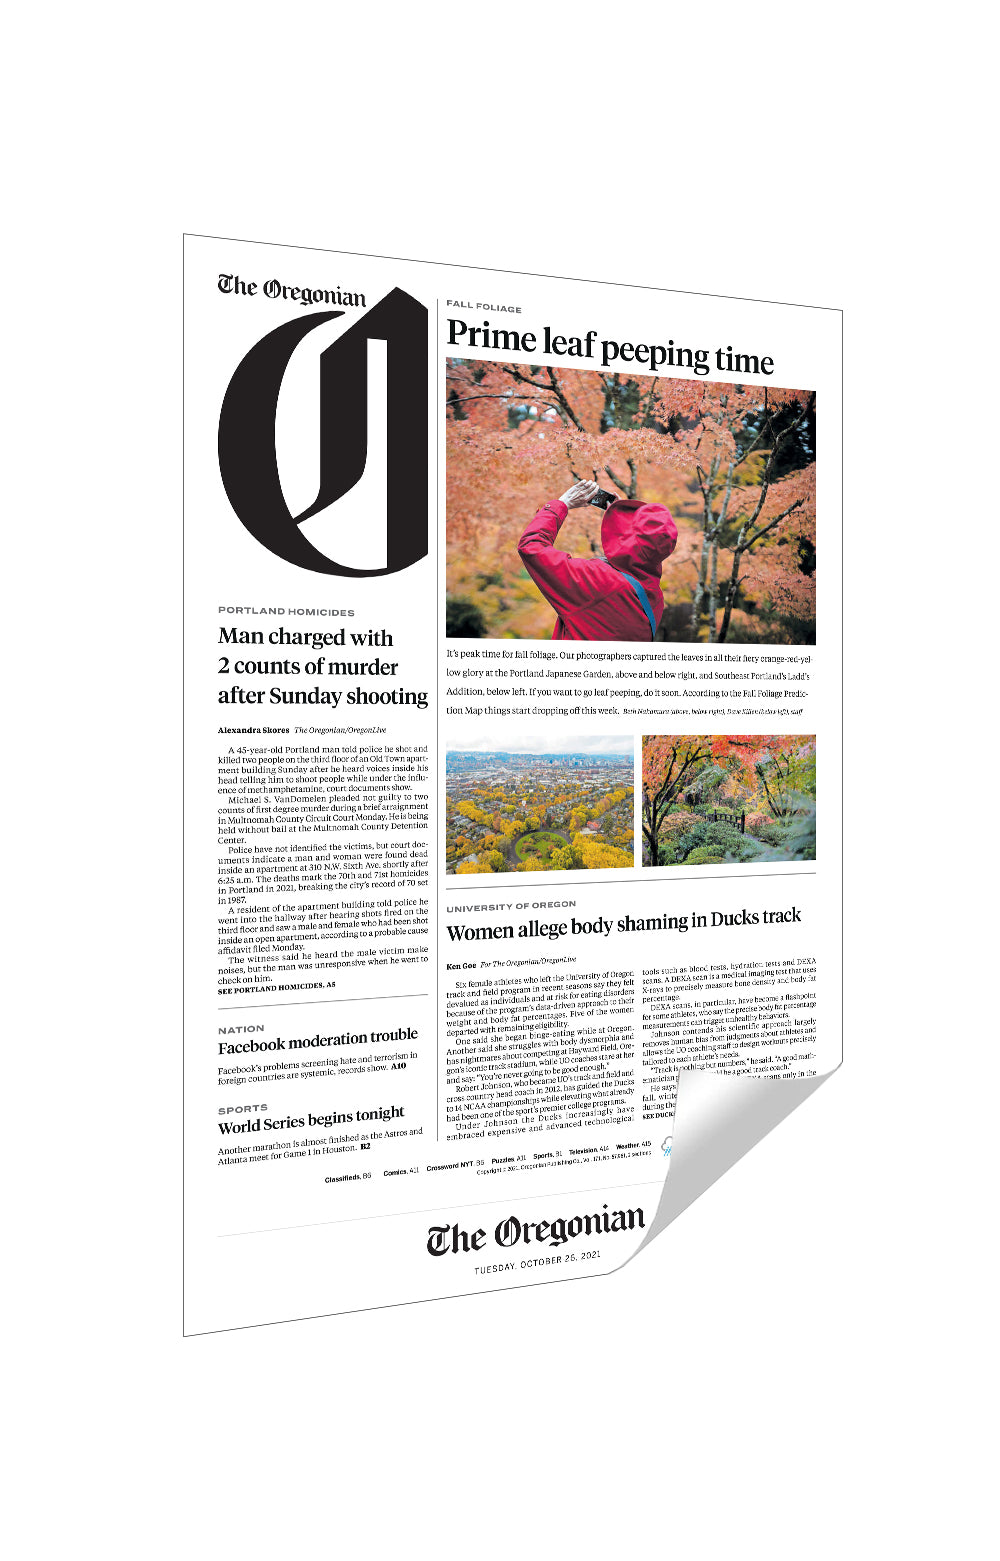 The Oregonian Article - Frameable Archival Print